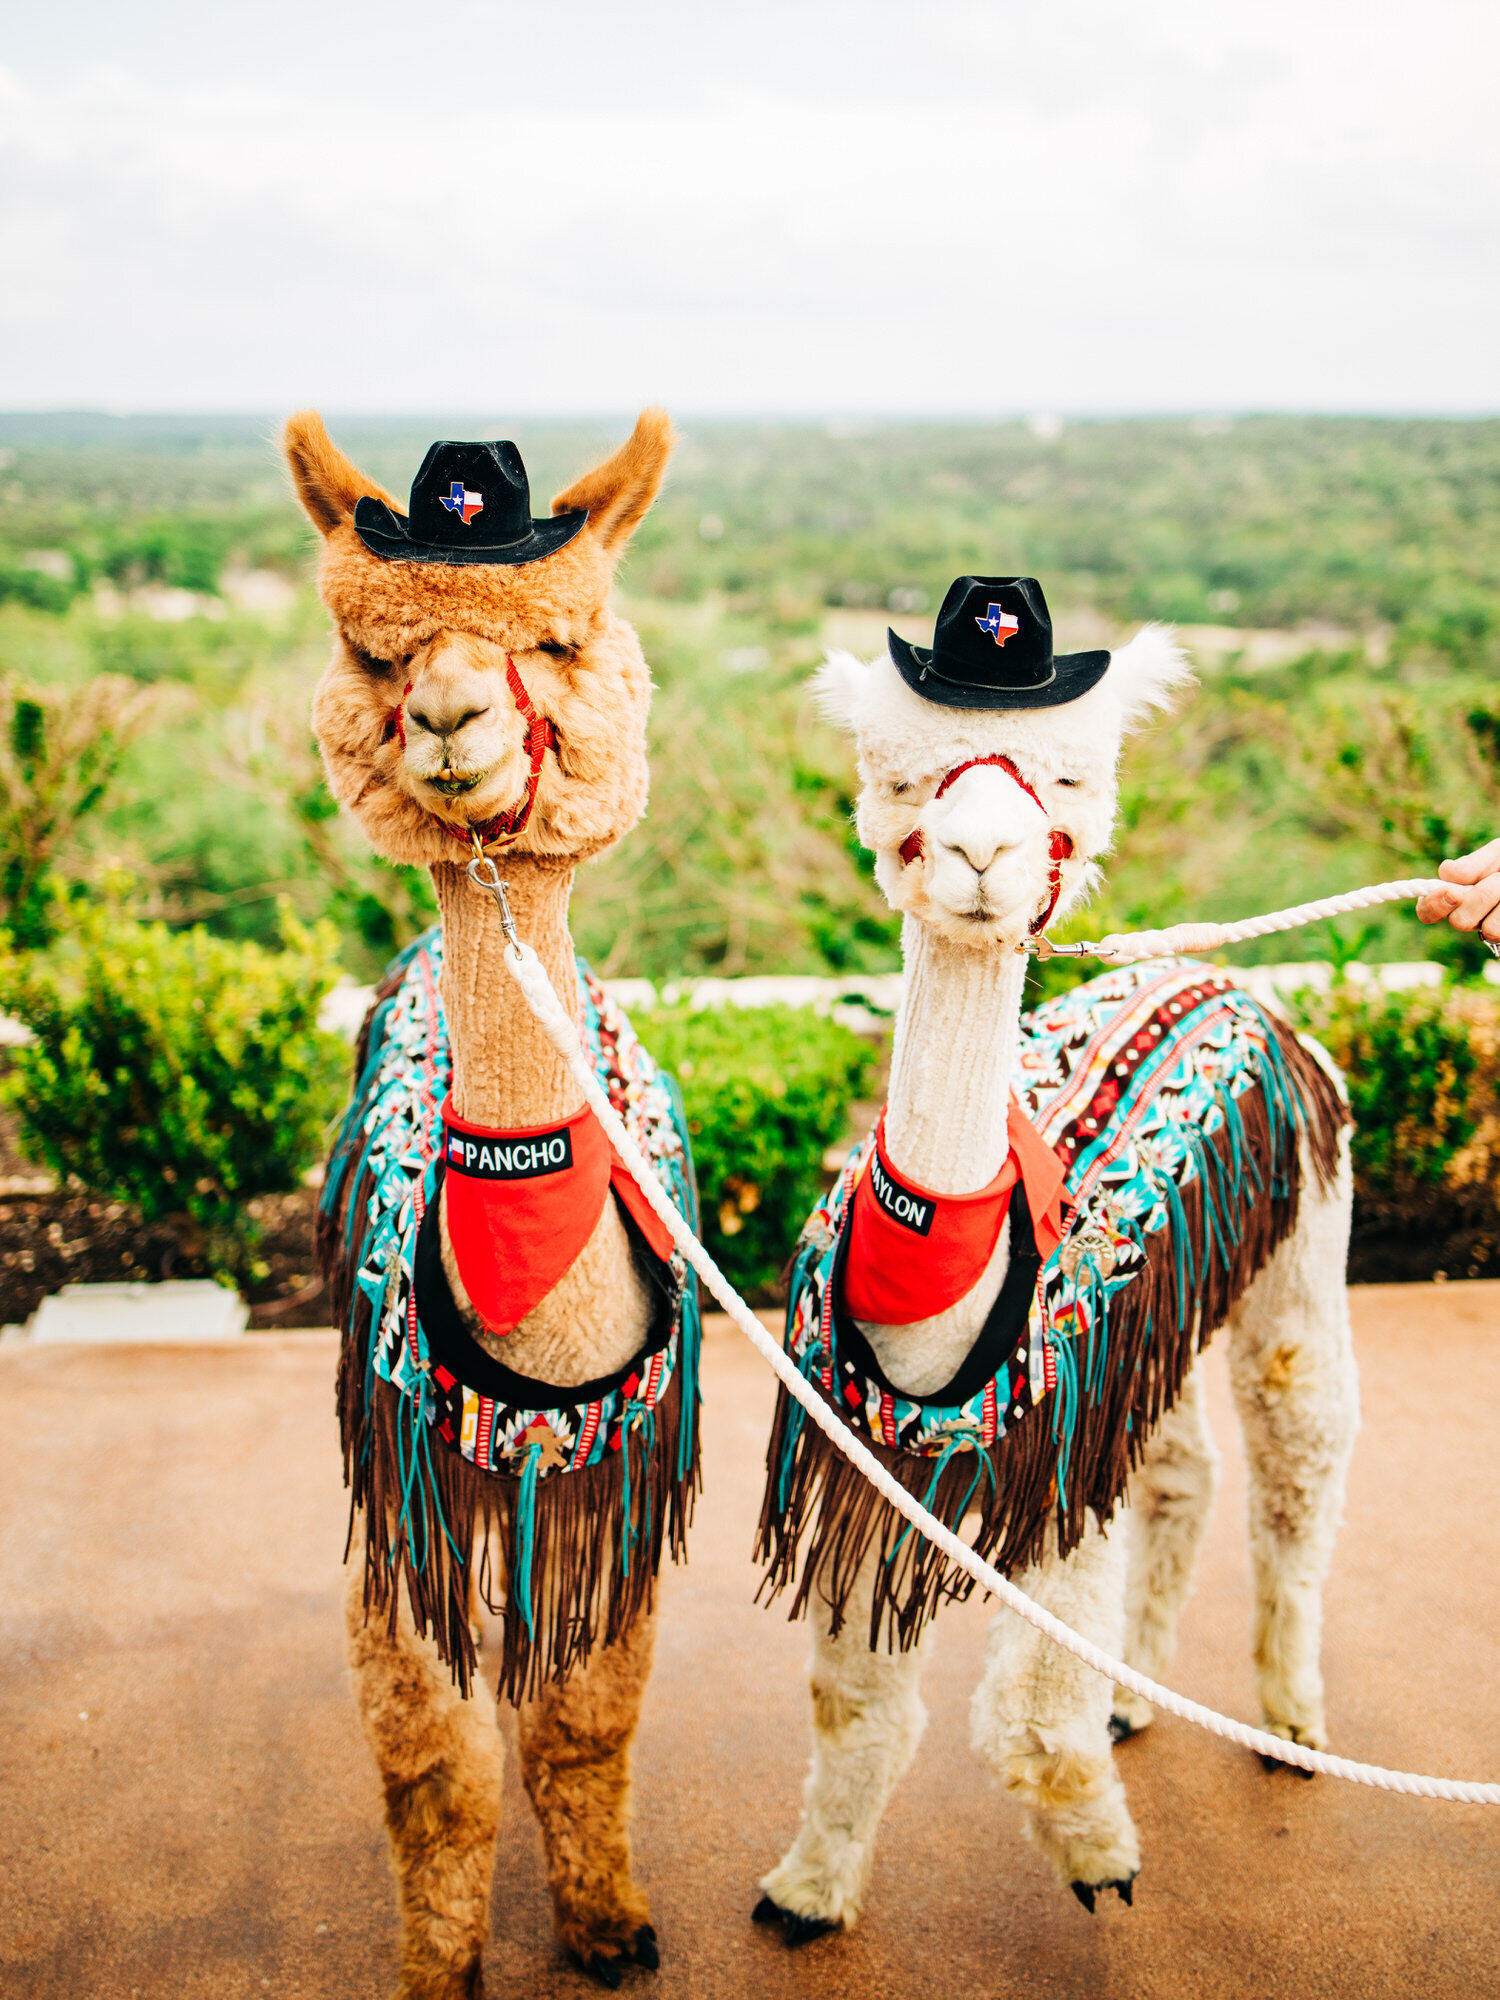 An image of a brown/tan alpaca and a white alpaca with the Texas hill country behind them, as seen at Canyonwood Ridge. The alpacas are attending a wedding as entertainment, and are wearing cowboy hats and colorful blankets.